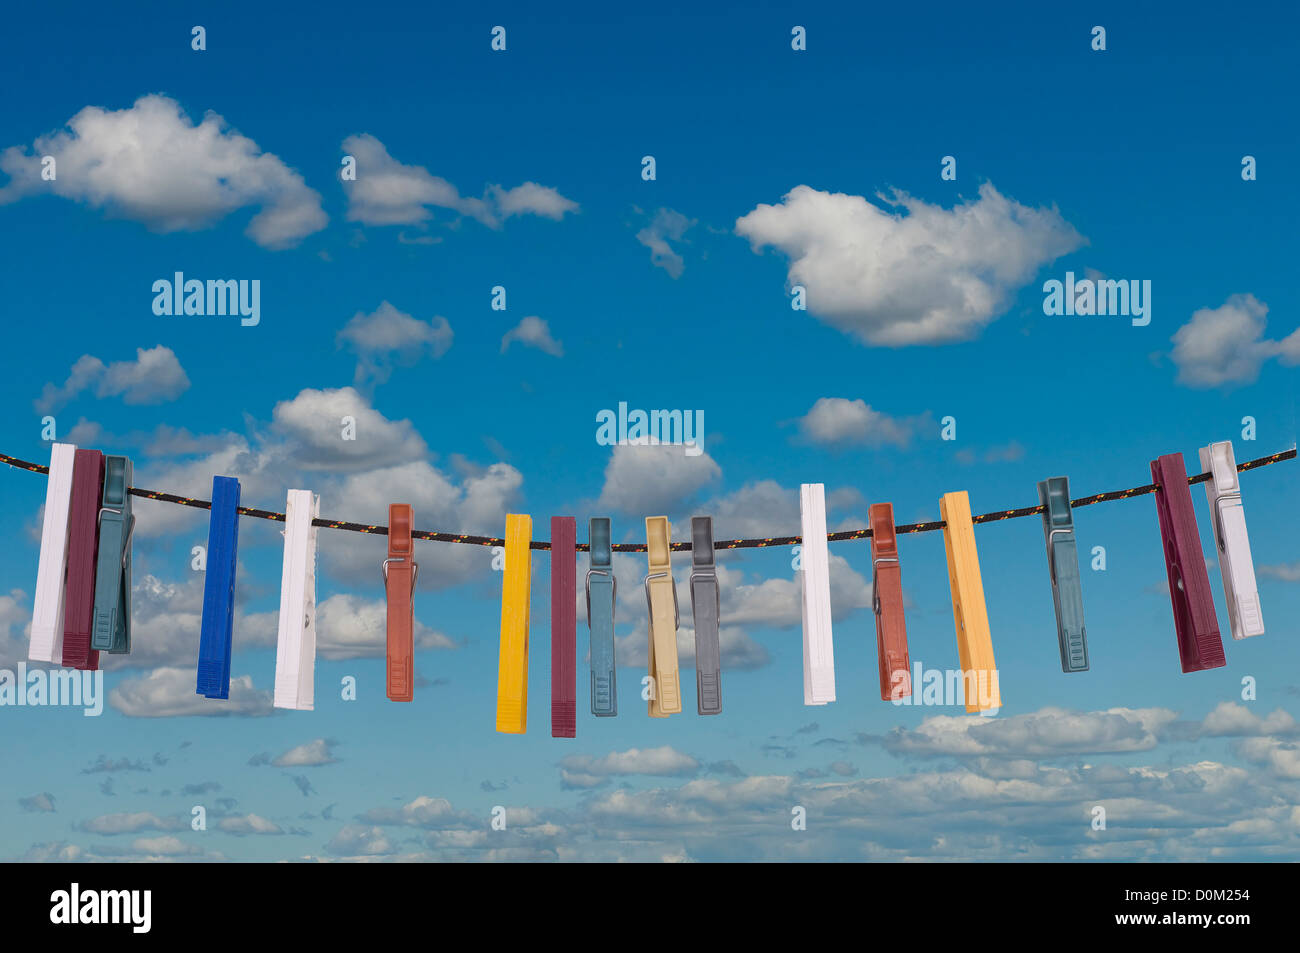 clothes pegs on the line Stock Photo